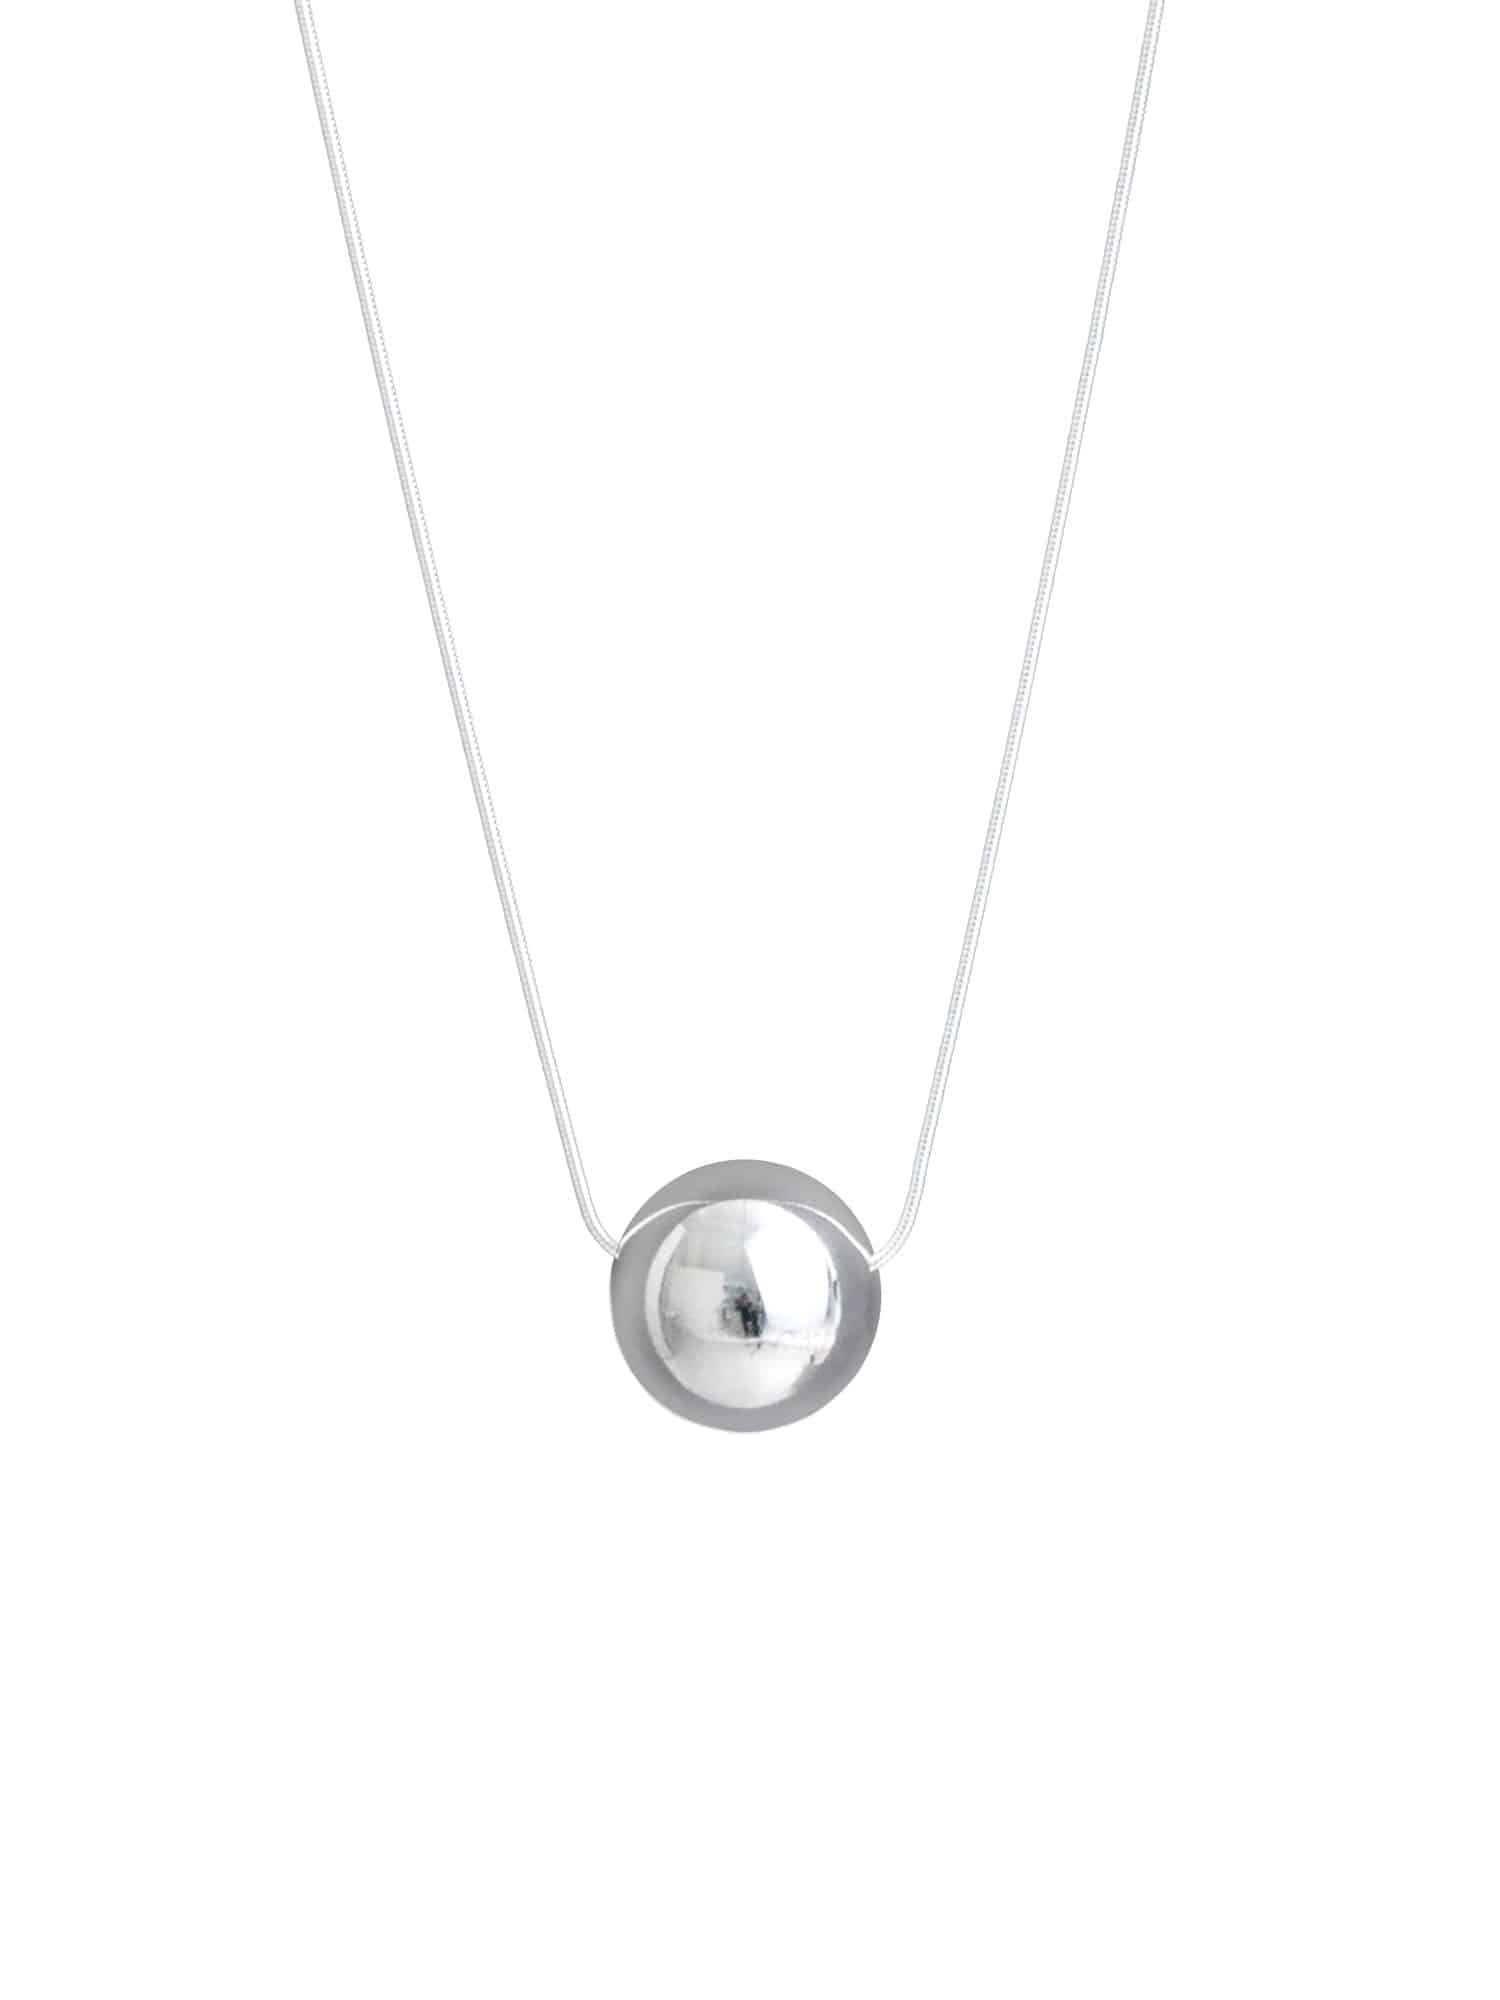 Bold Silverball Necklace